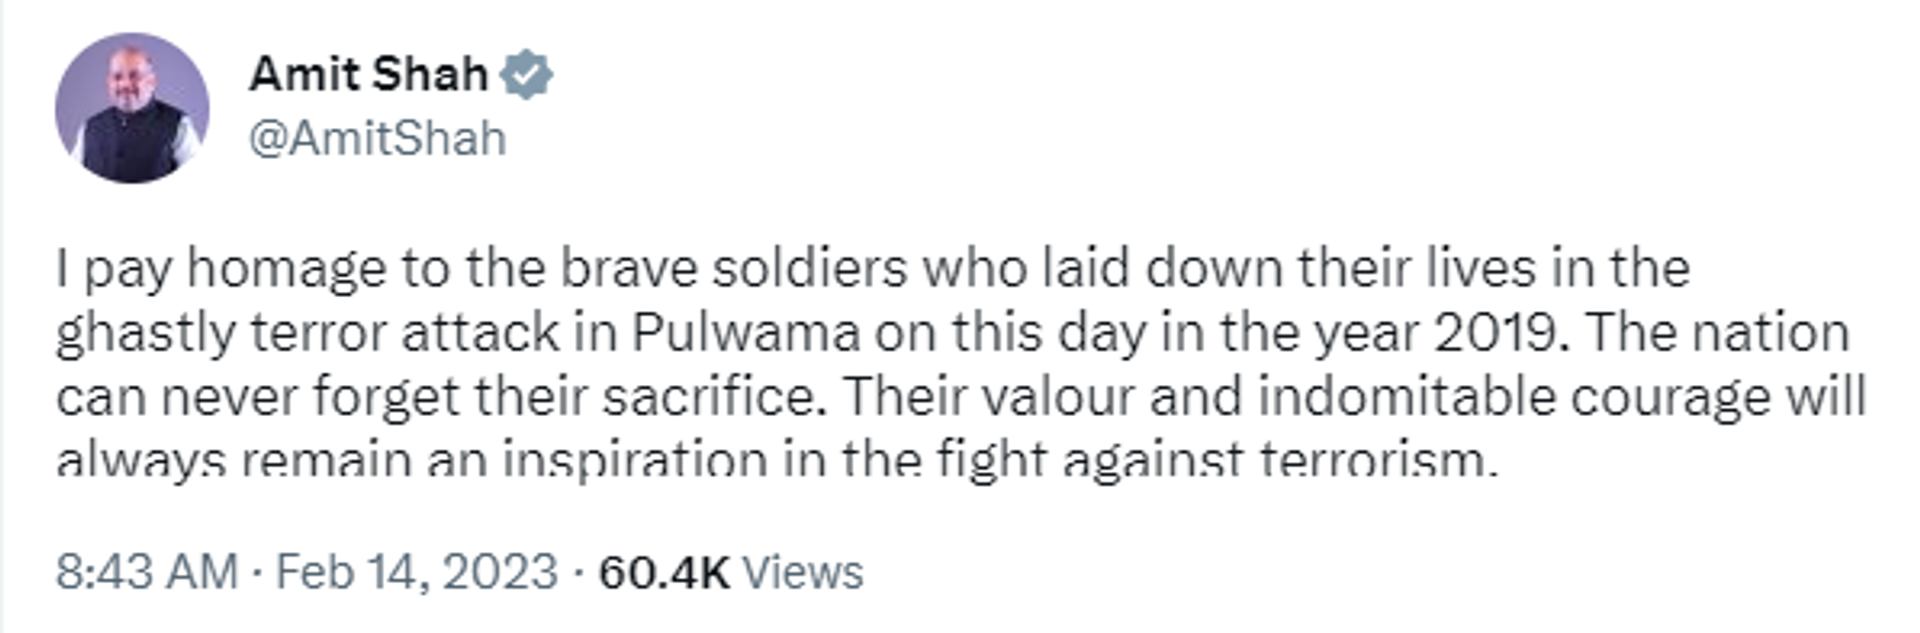 Federal Home Minister Amit Shah Remembers Bravehearts of 2019 Pulwama Attack - Sputnik India, 1920, 14.02.2023